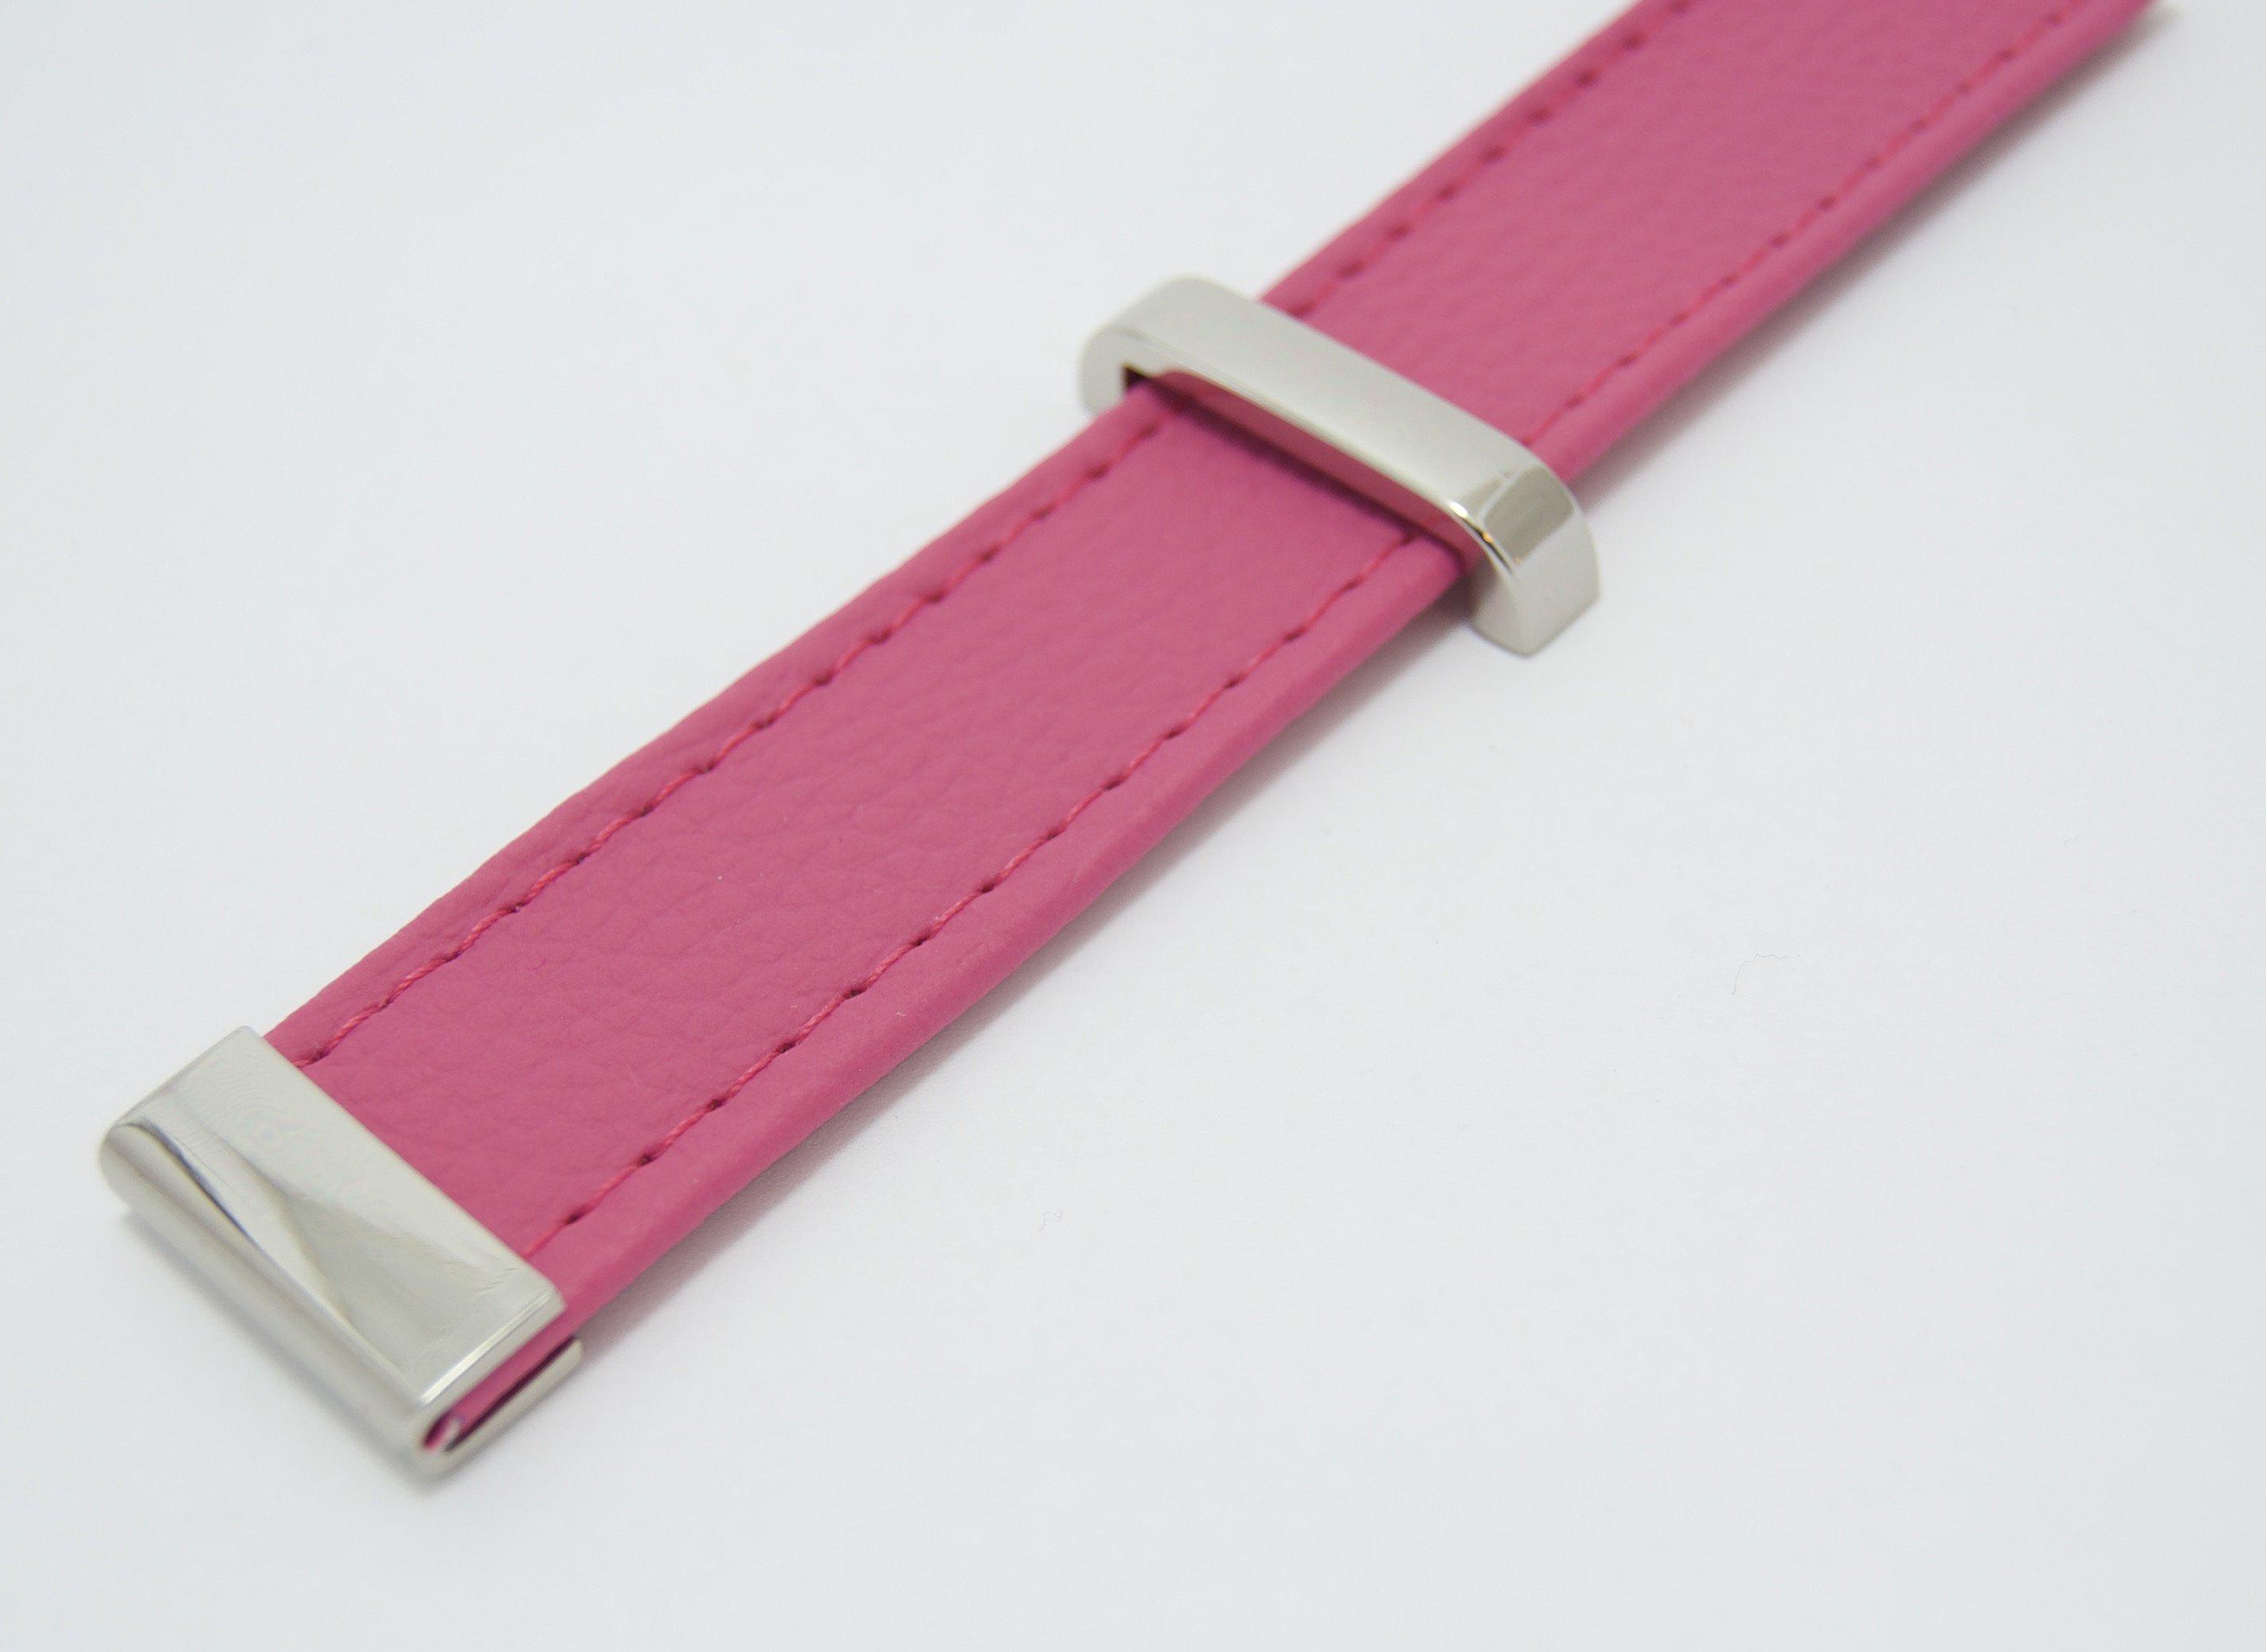 strap keepers hold your straps in place and look great with Bobbin Girl's strap end covers